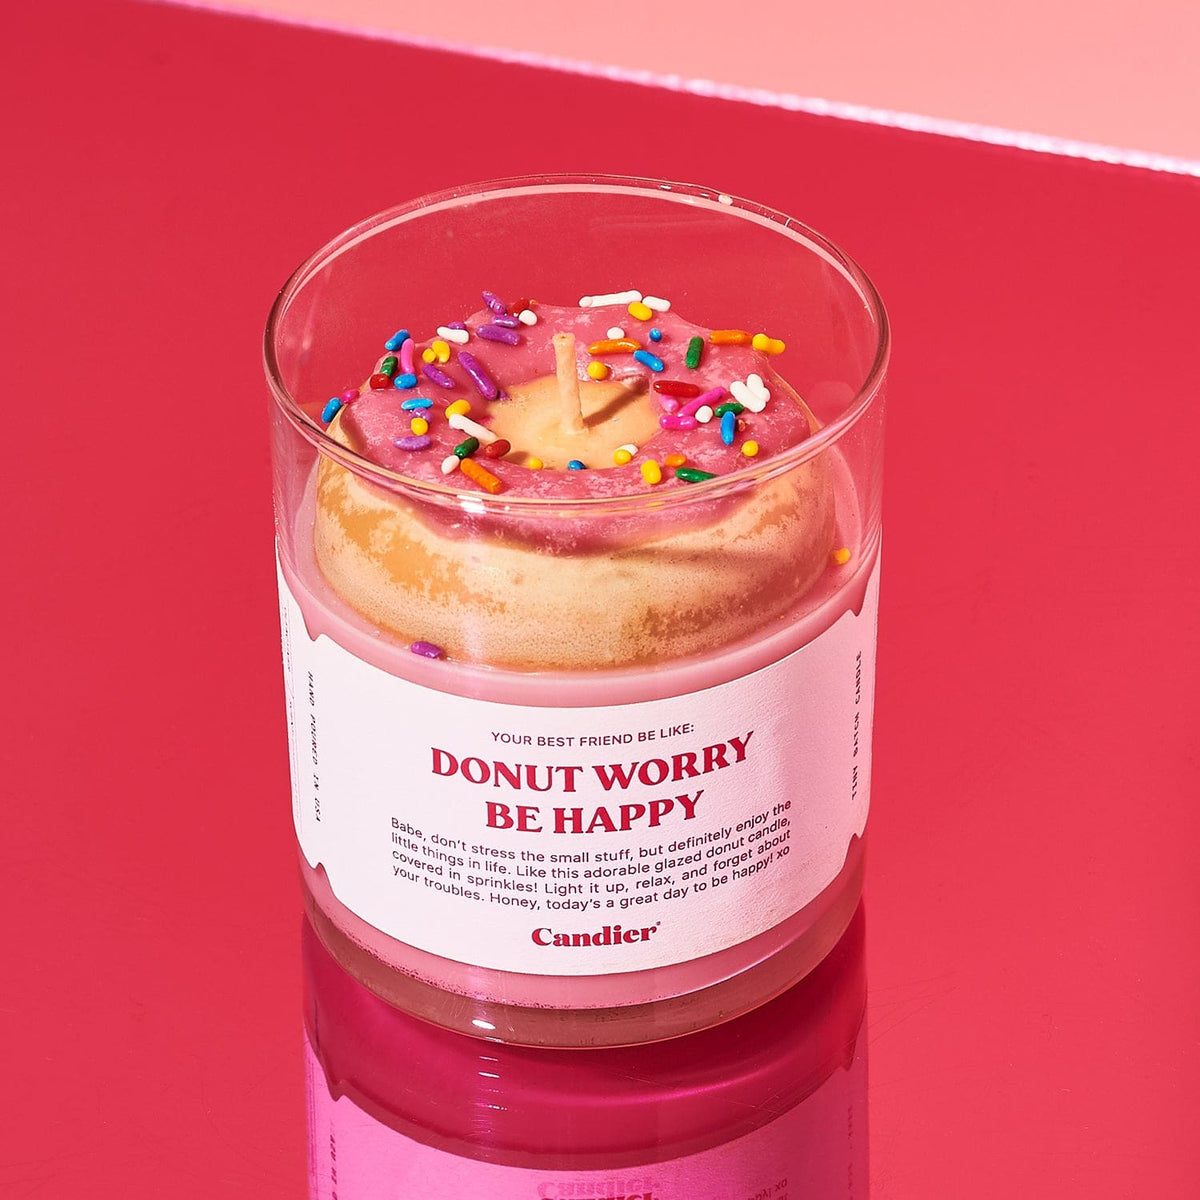 https://cdn.shopify.com/s/files/1/2636/1058/files/ryan-porter-donut-worry-candle-barbiecore-gifts-fake-food-530_1200x.jpg?v=1690494796